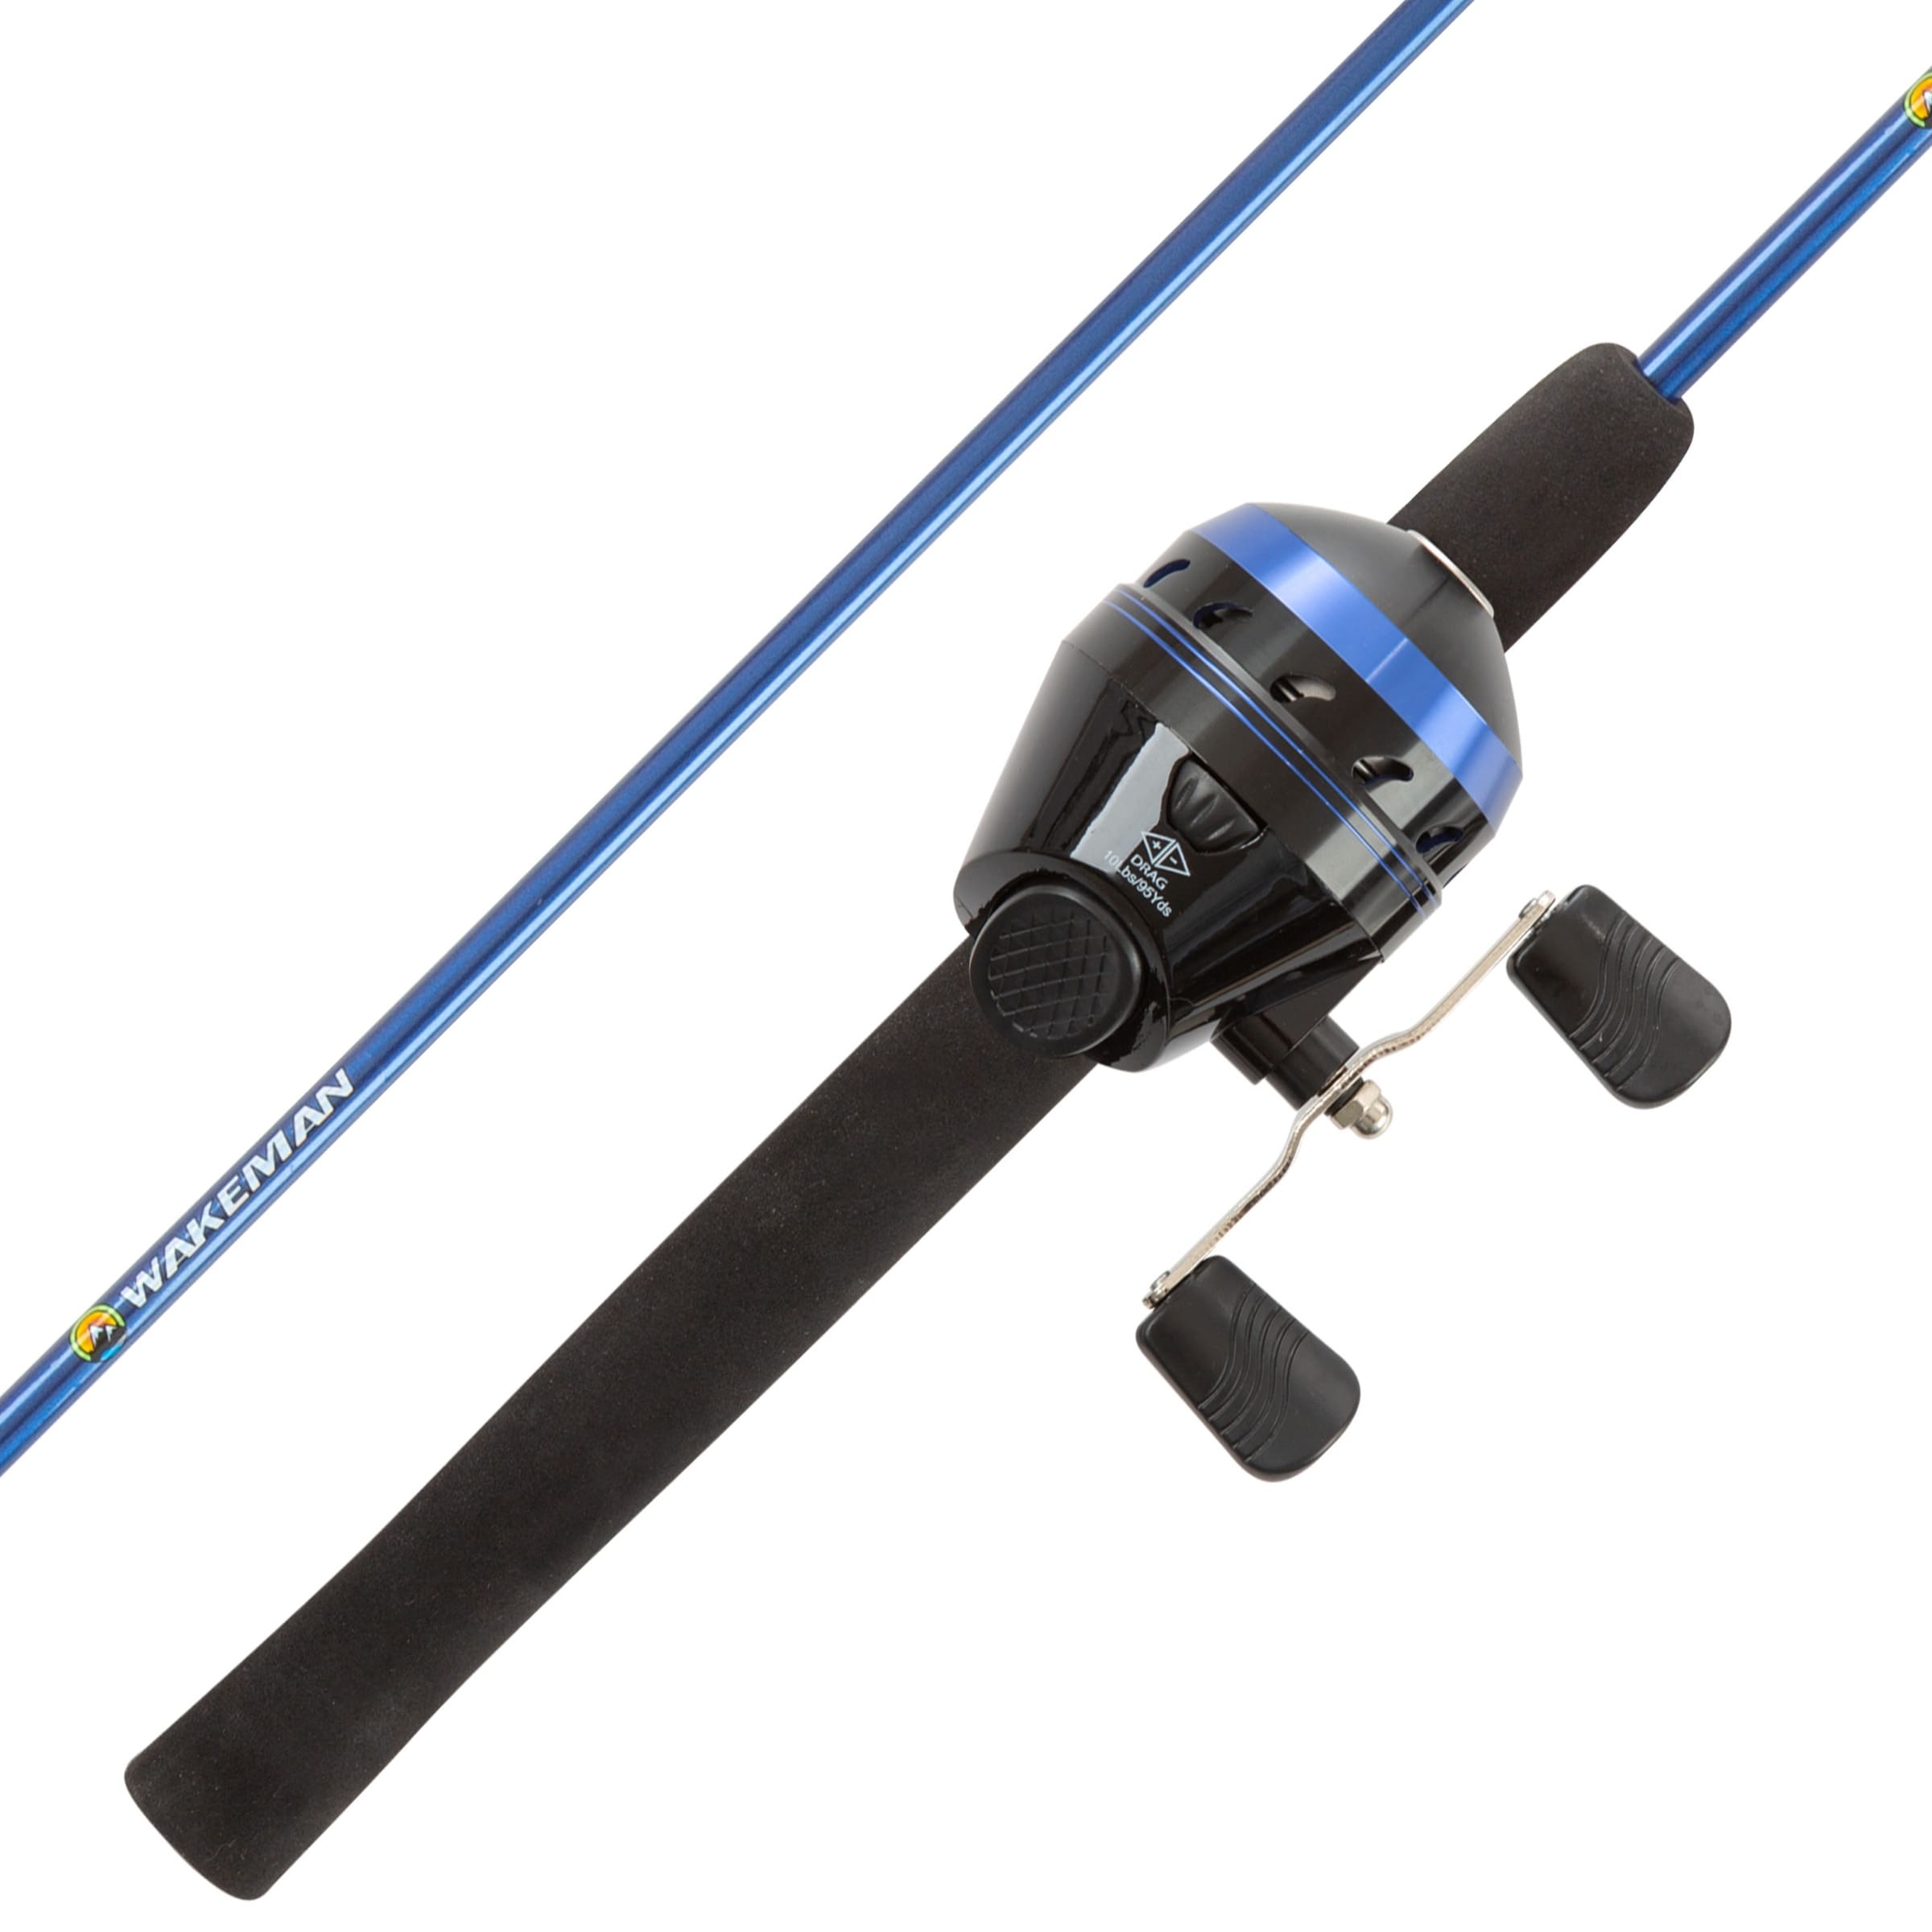 Fishing Rod and Reel - 66in Fiberglass Pole - Spincast for Beginners by Wakeman Outdoors (Blue) - Blue - 66